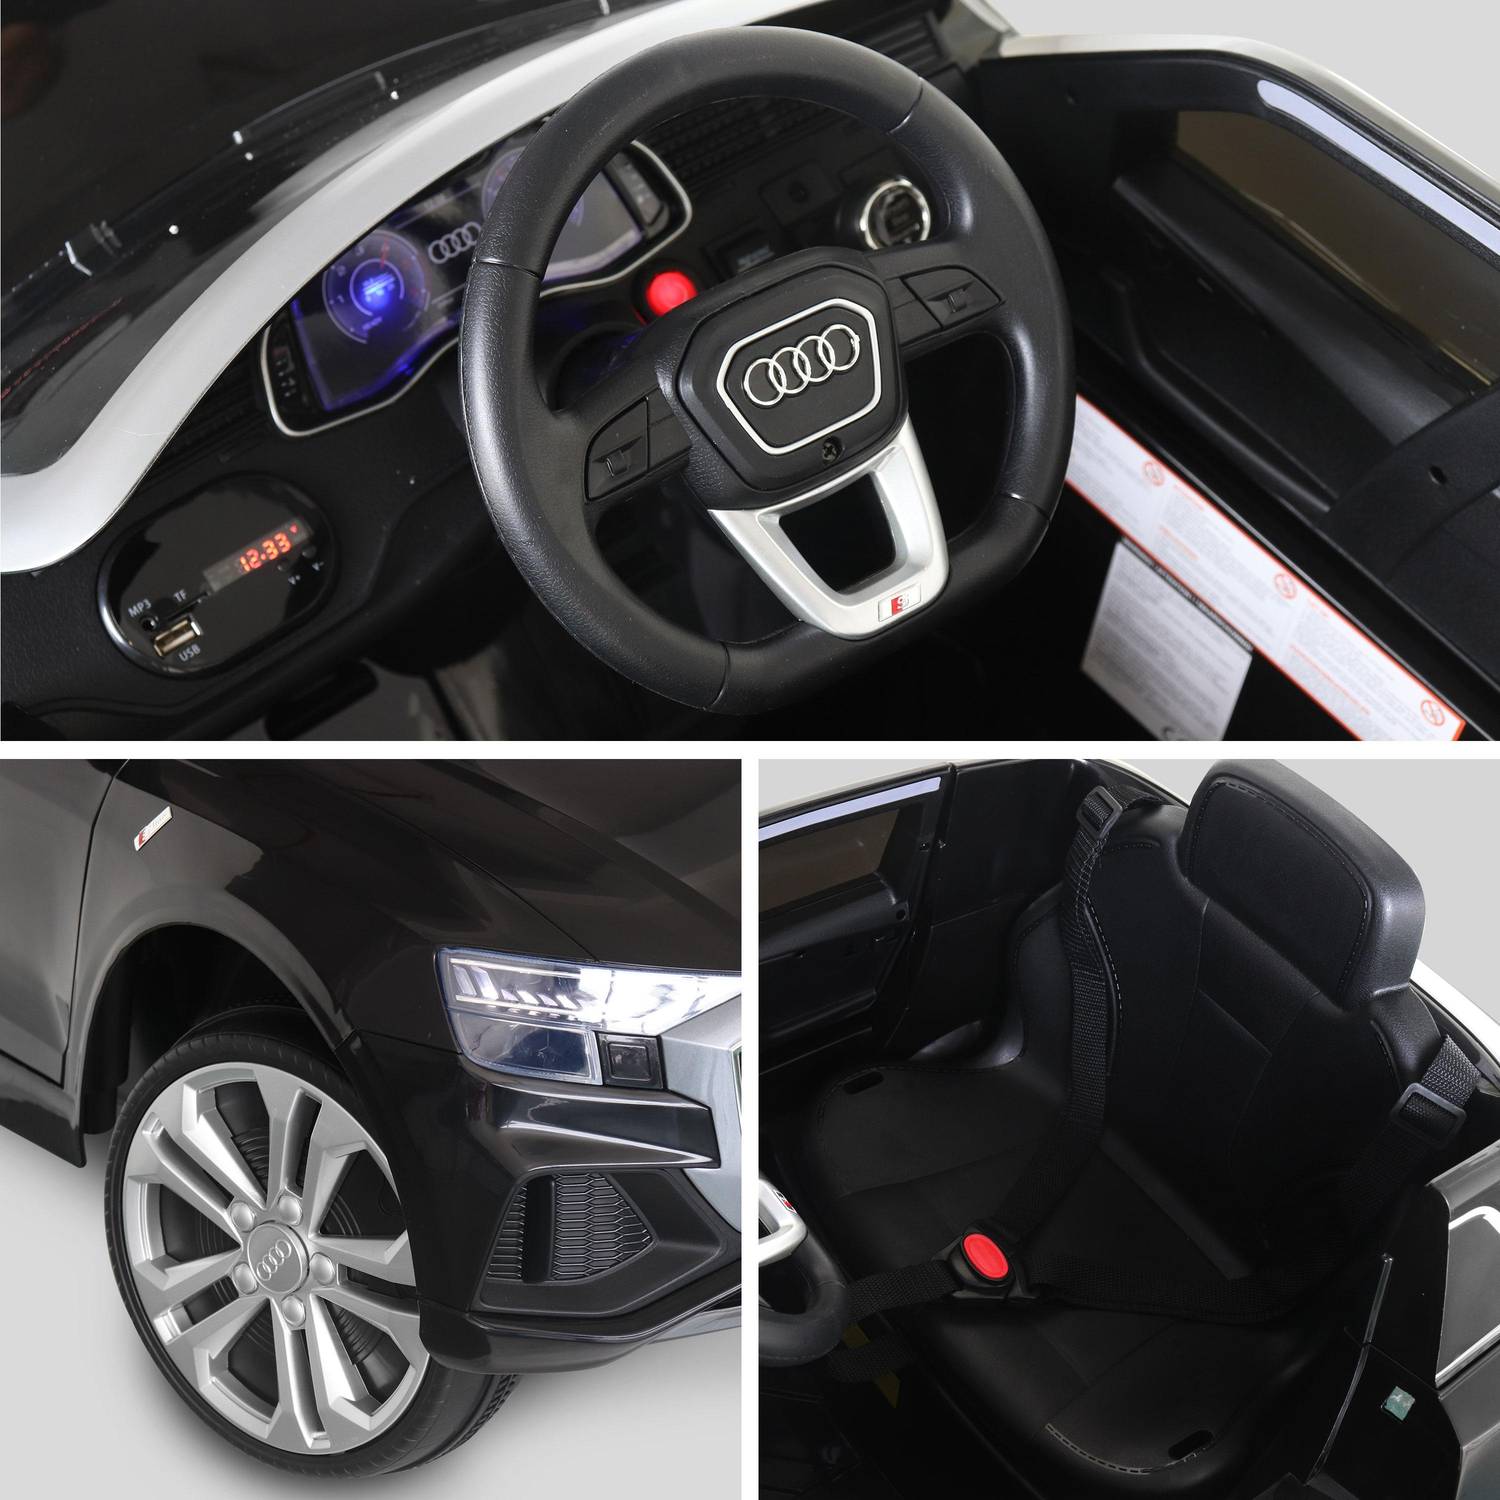 Children's electric car 12V, 1 seat with car radio and remote control - AUDI Q8 - Black Photo4